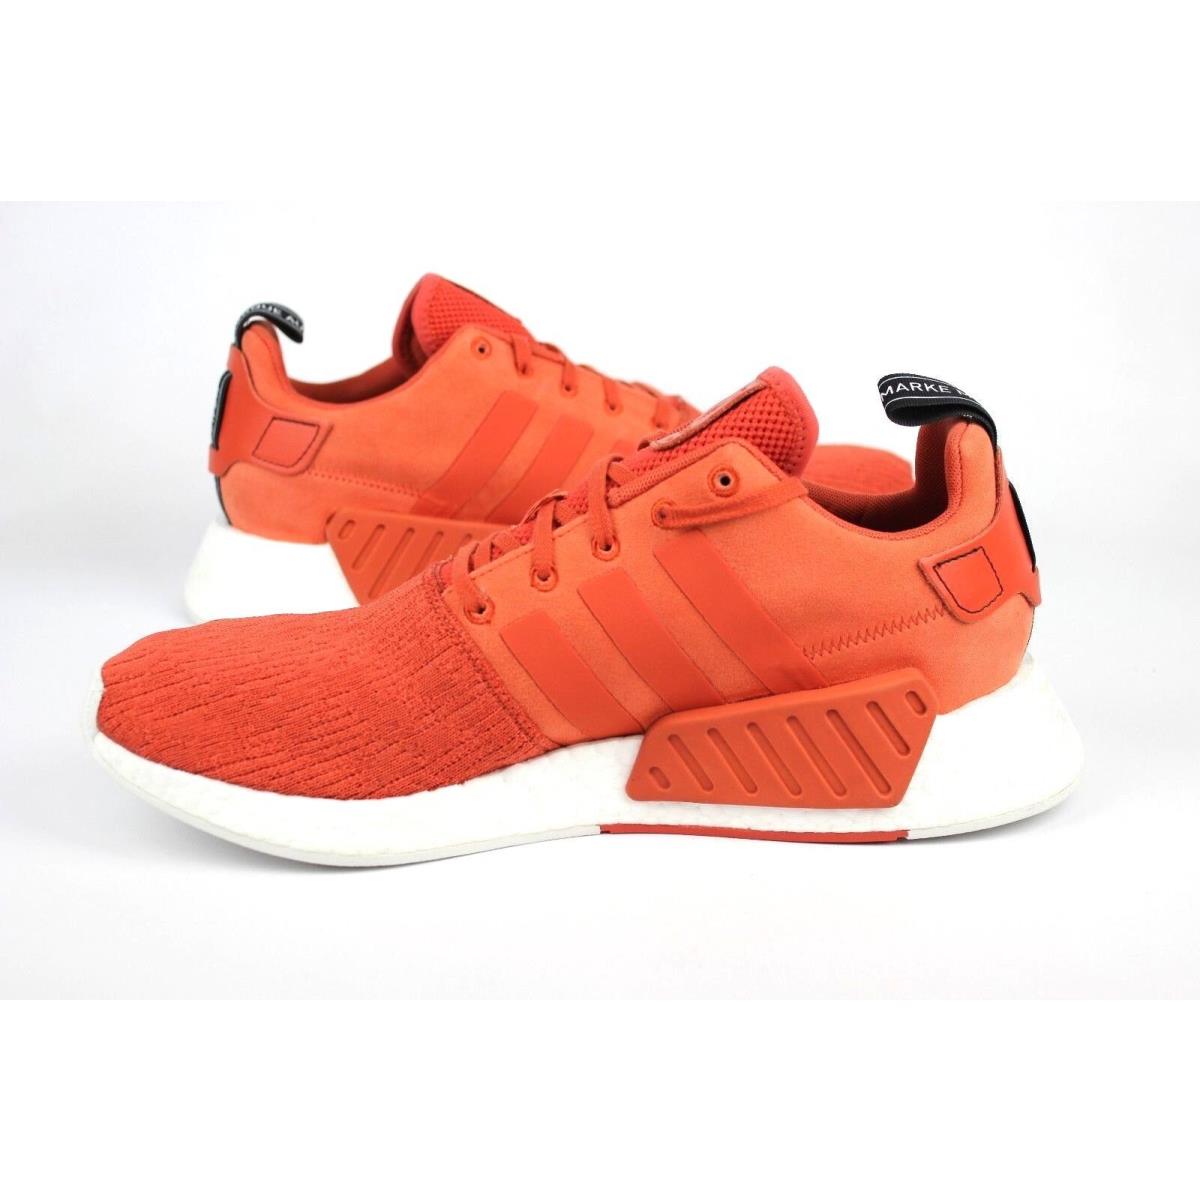 Adidas shoes NMD - Red 3